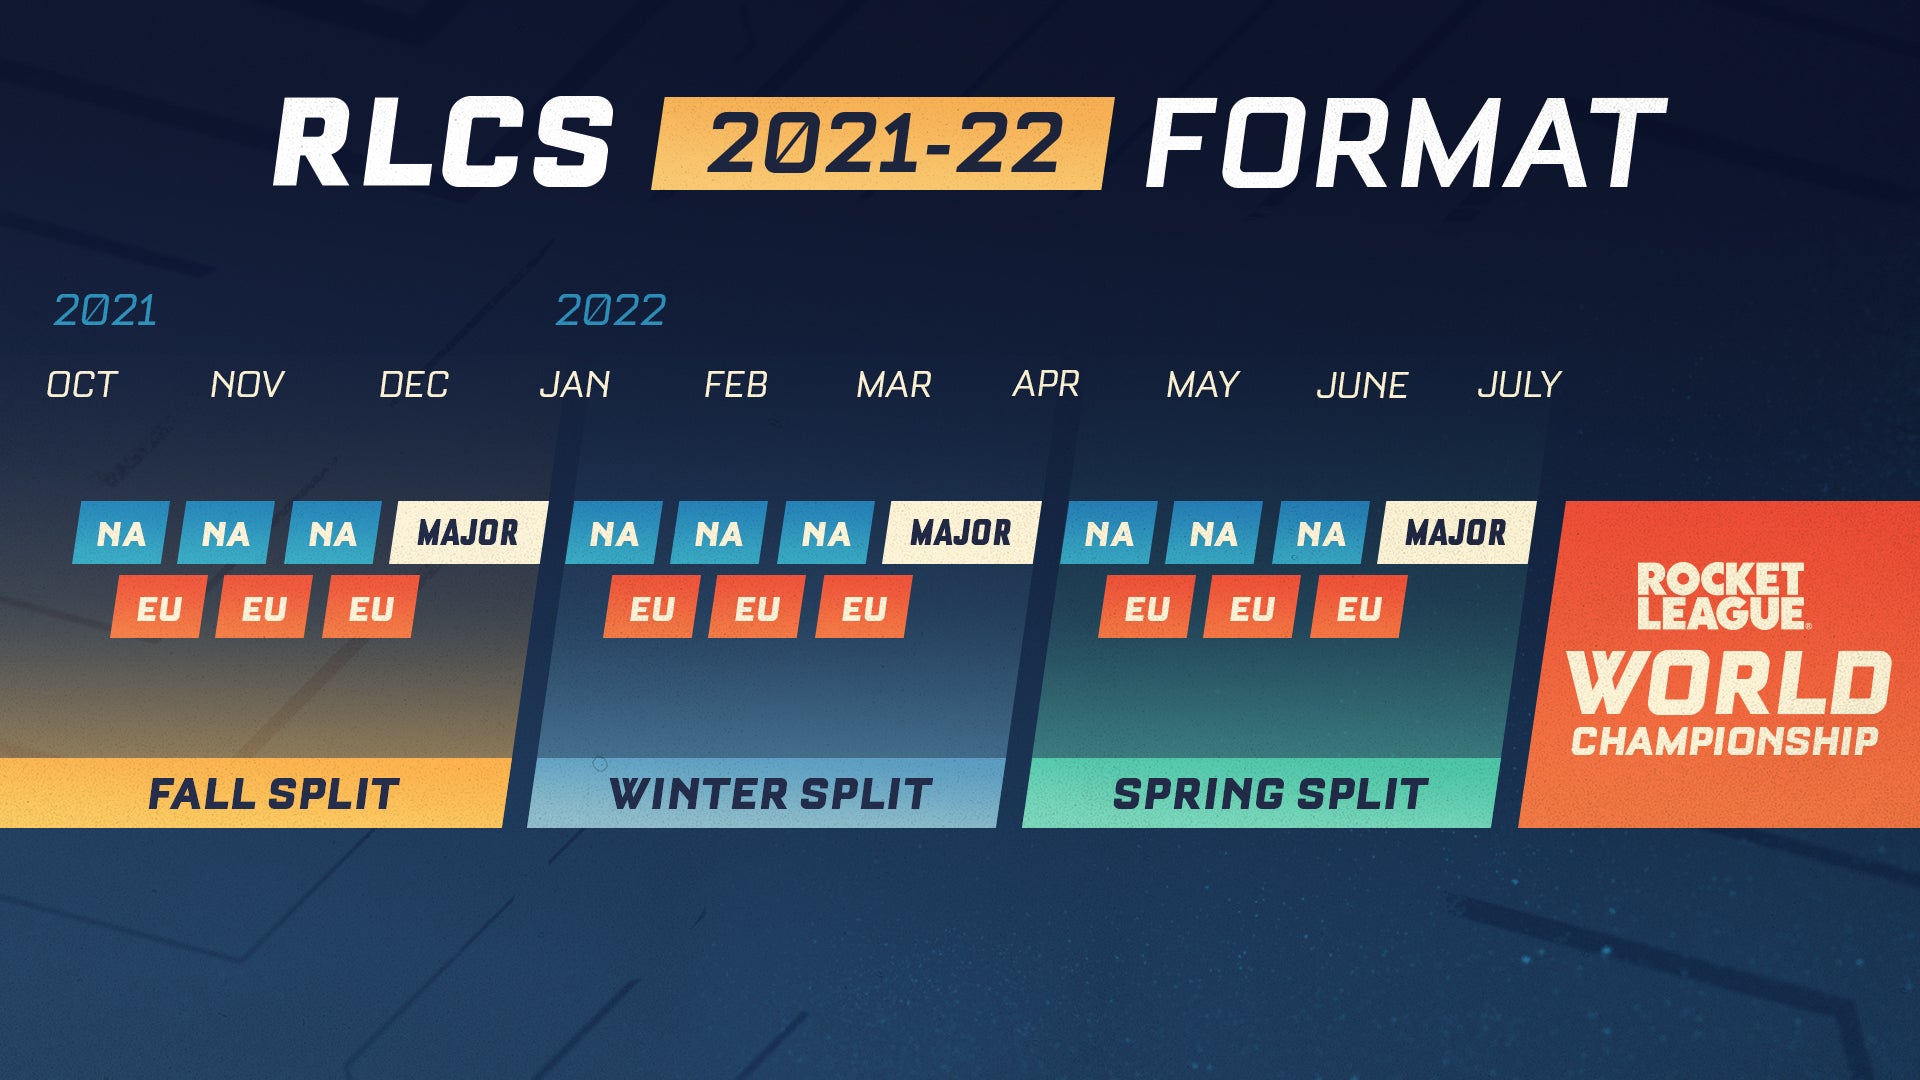 RLCS_Format_Overview_03.jpg